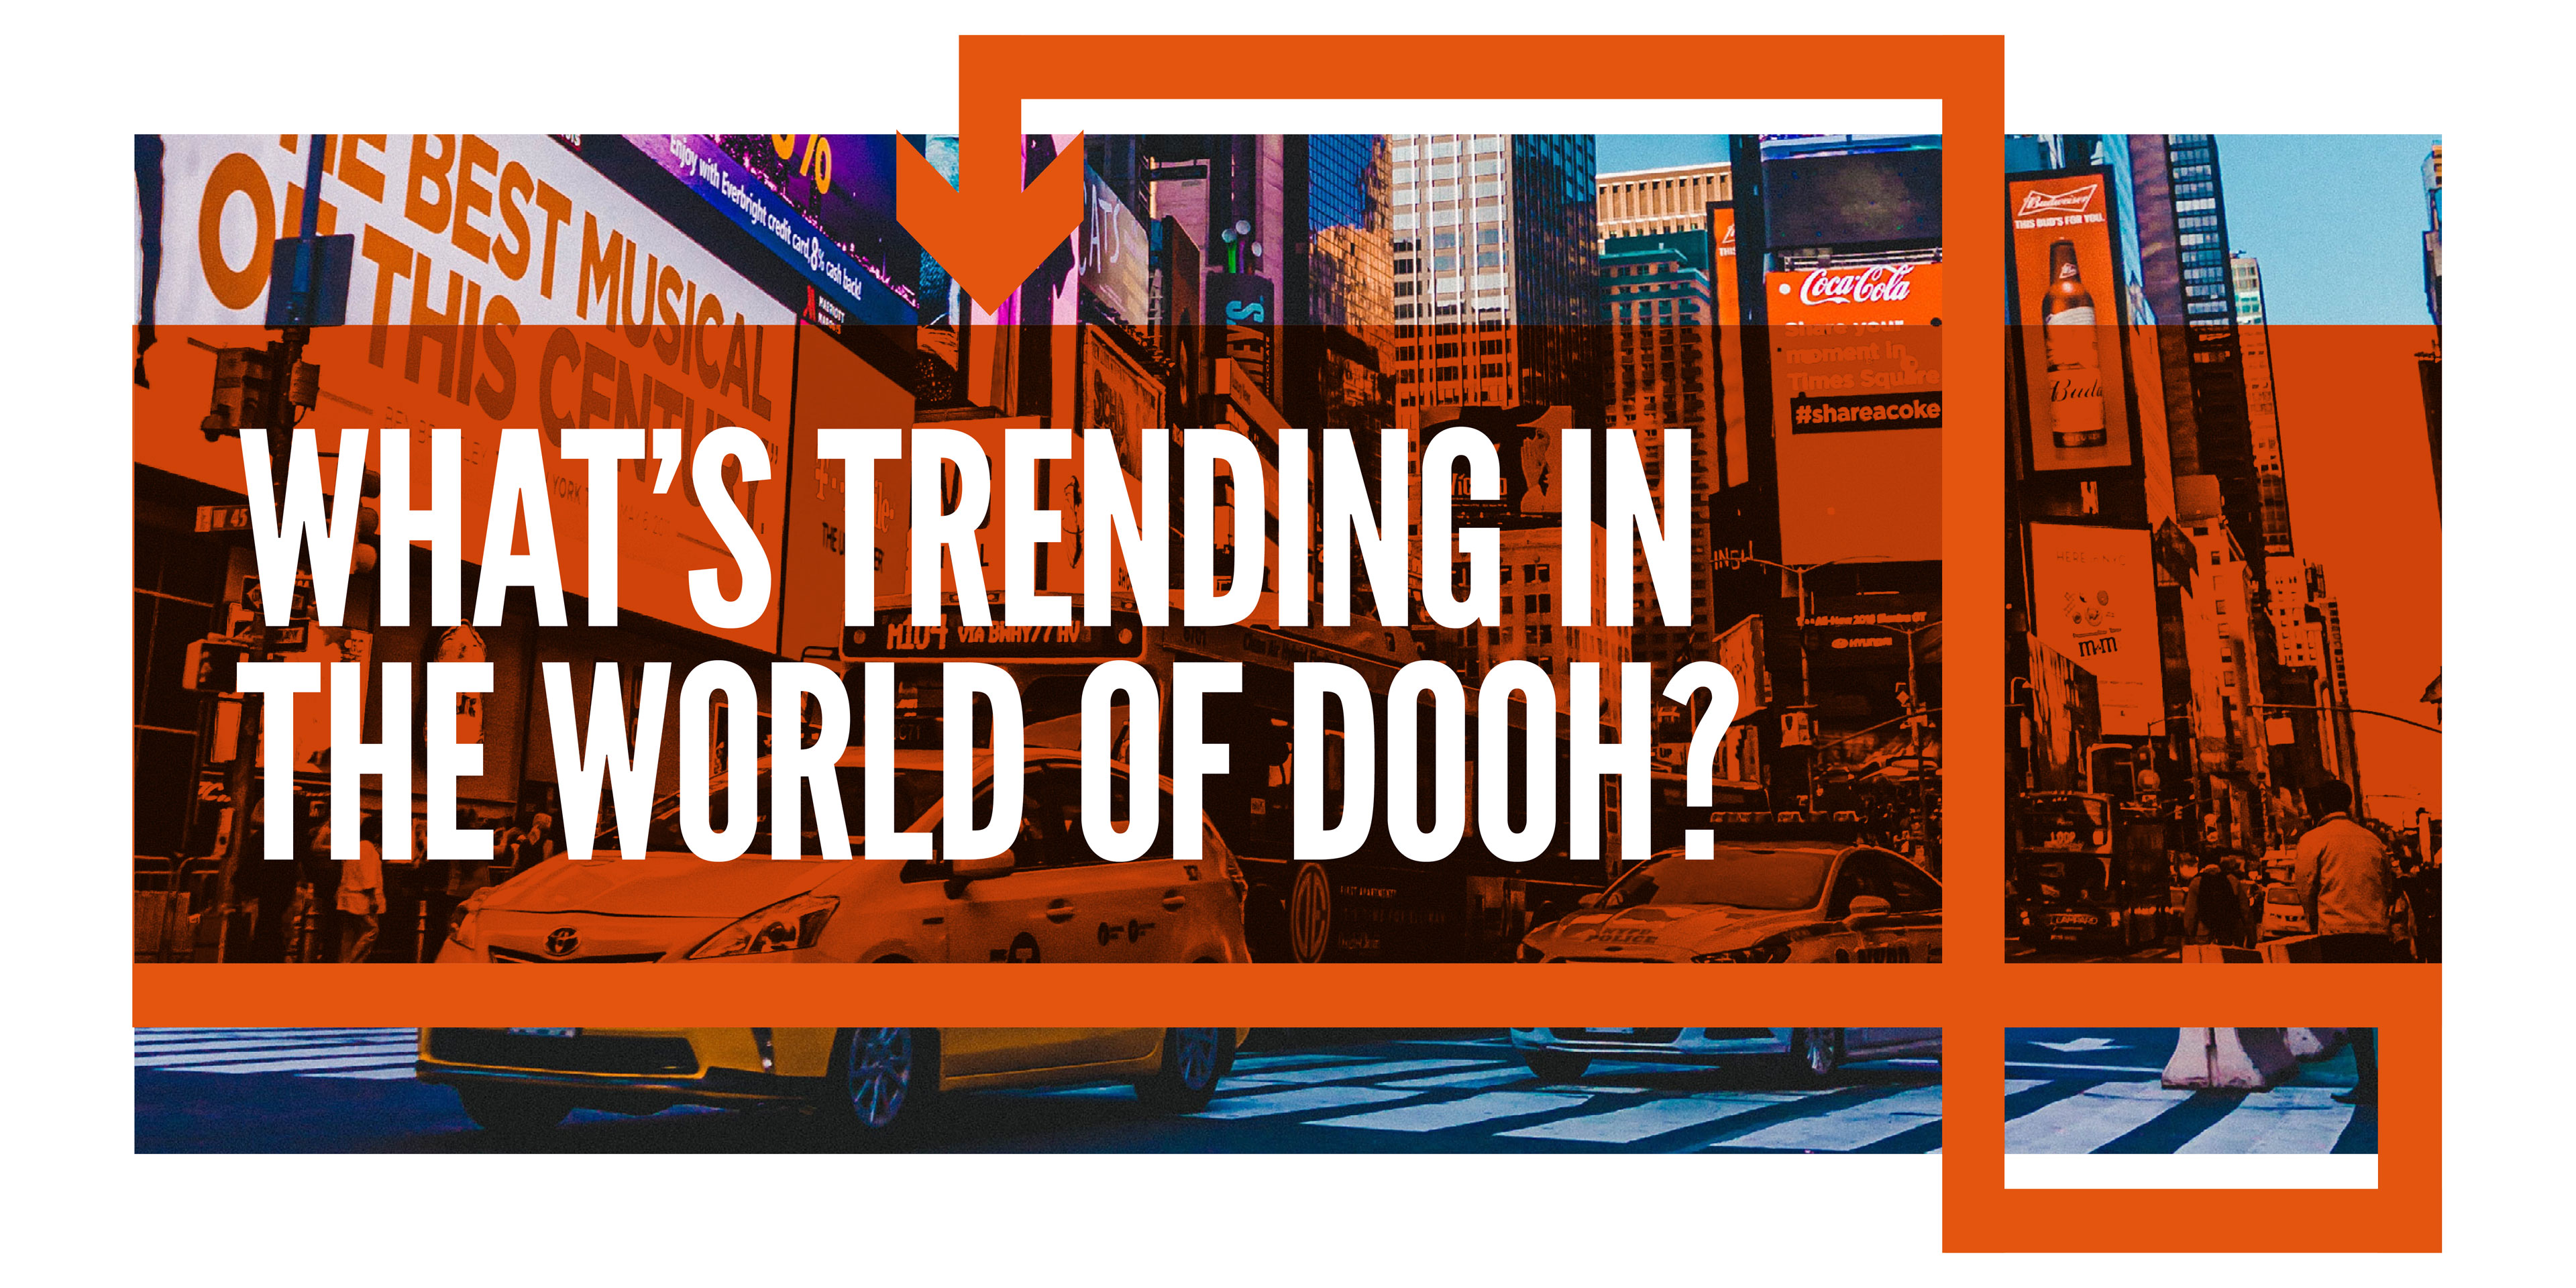 Image: What's trending in the world for DOOH?